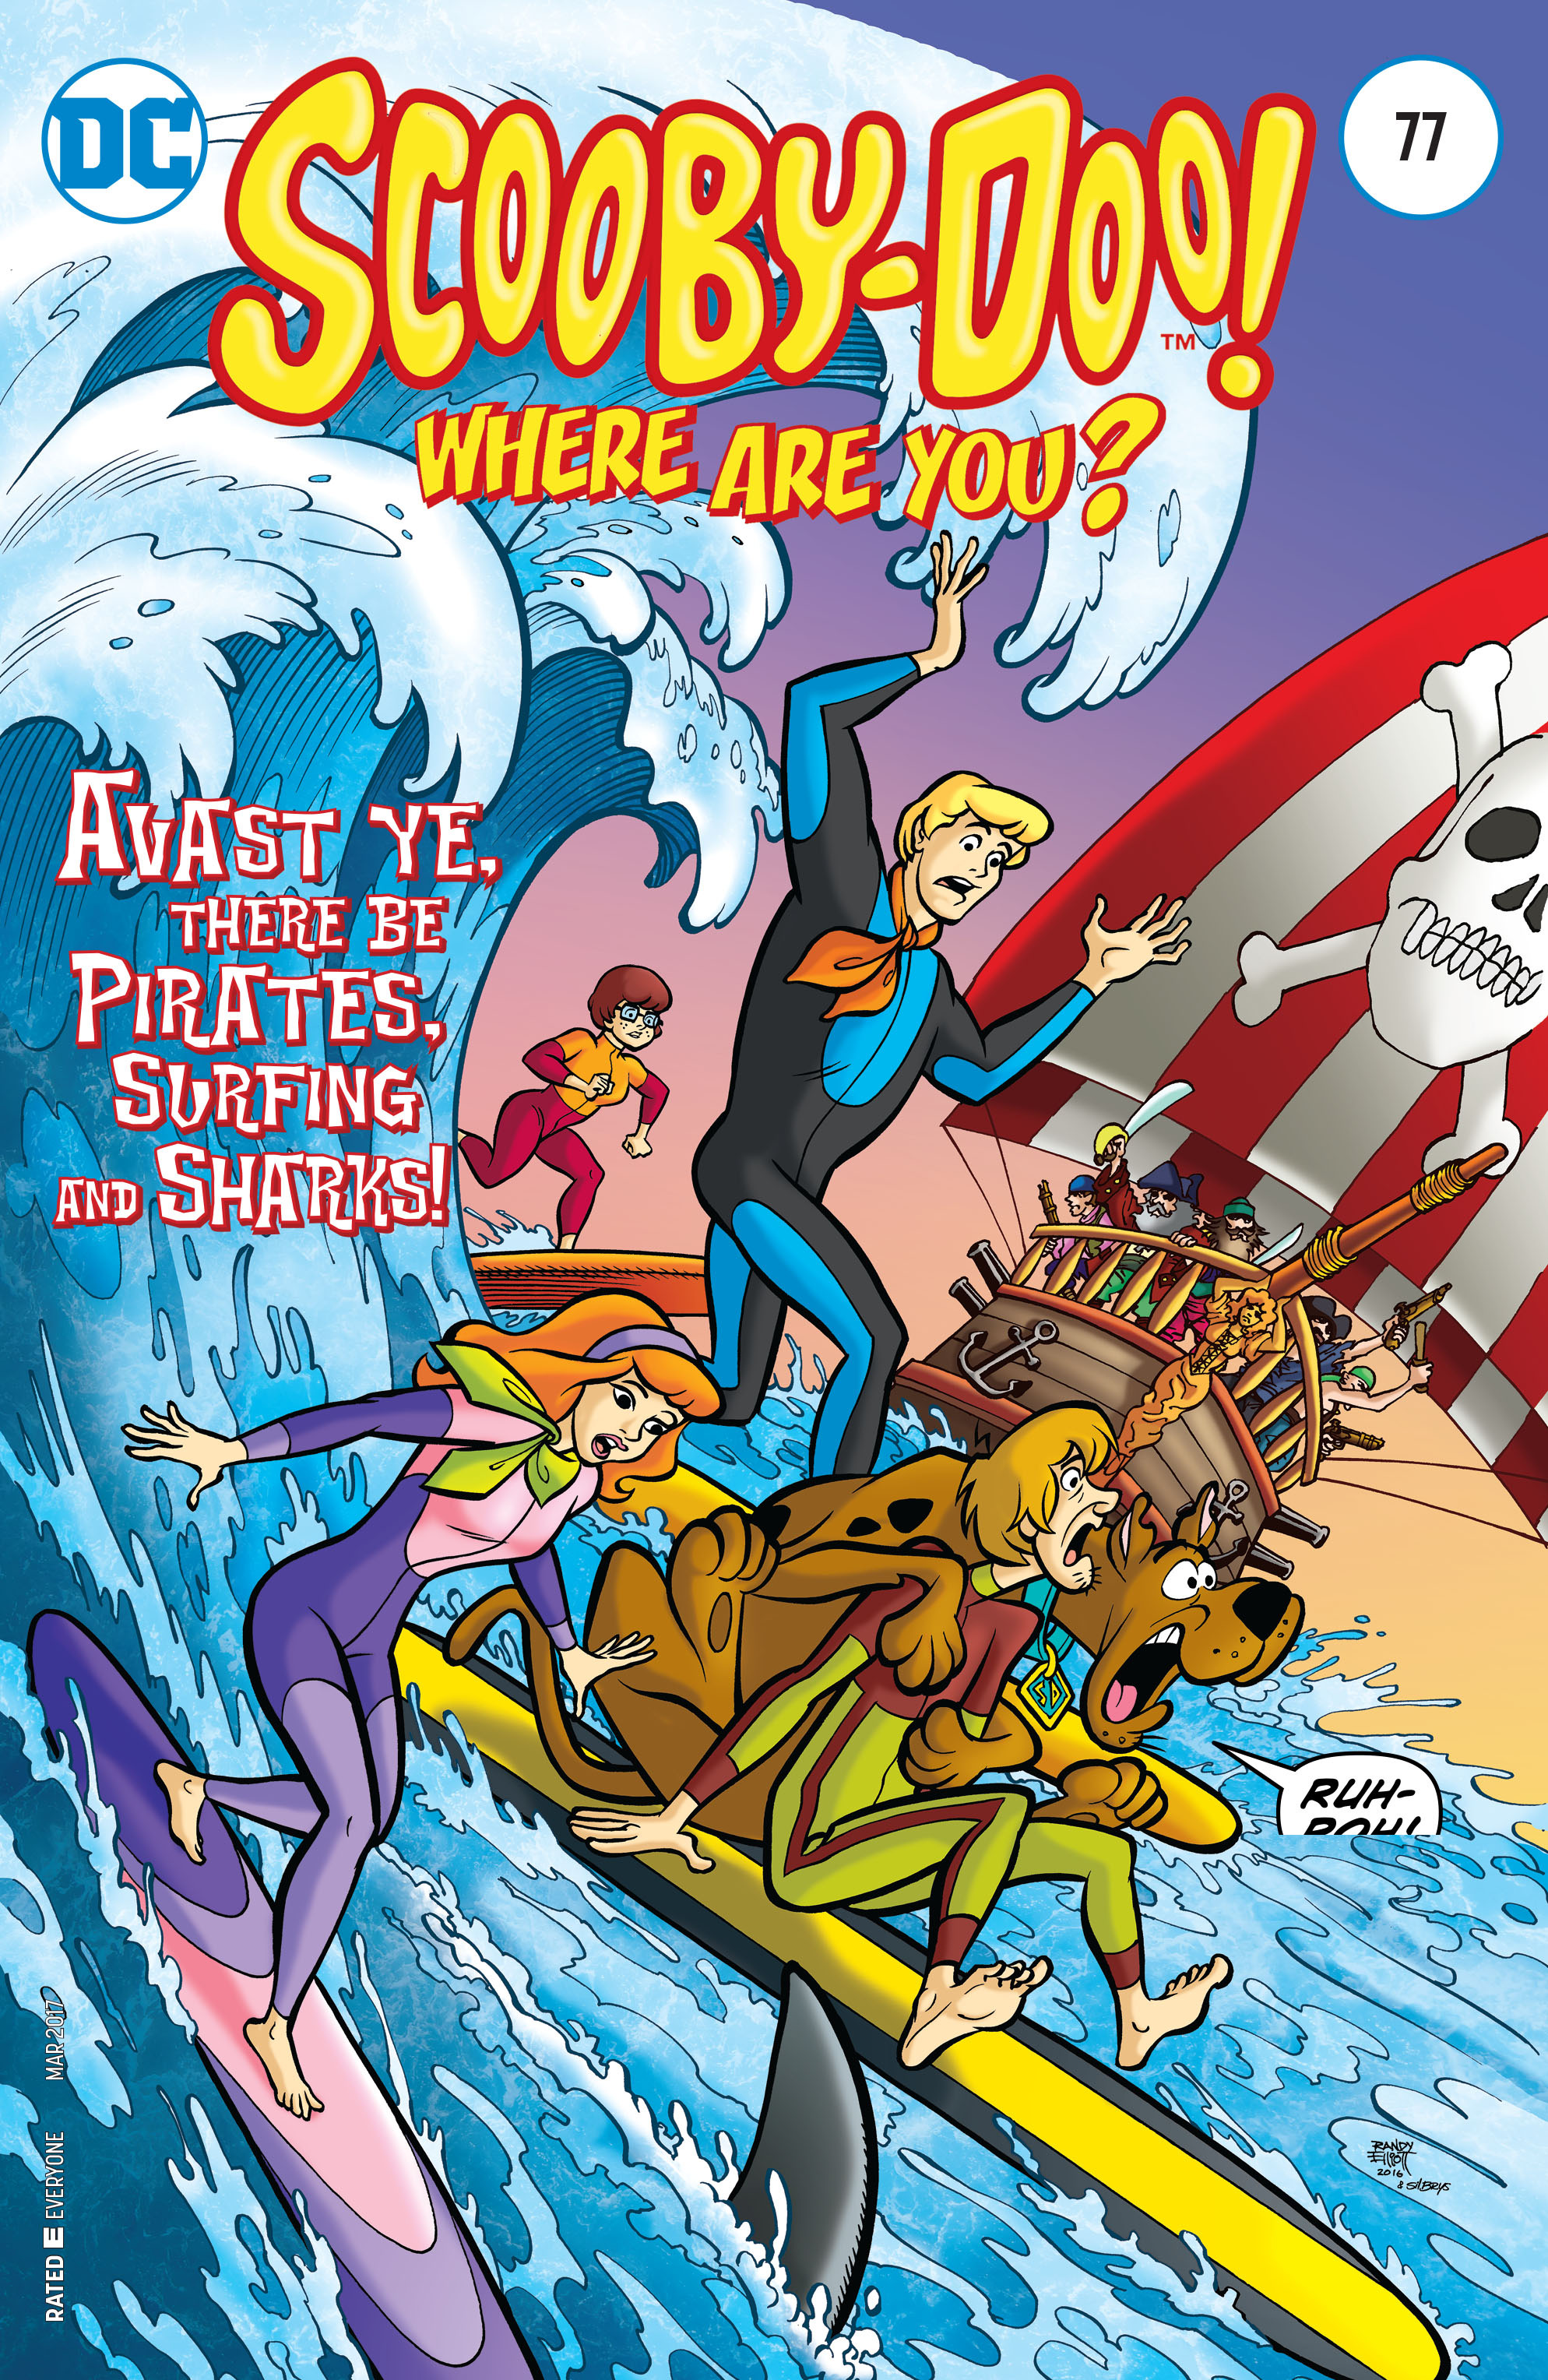 Read online Scooby-Doo: Where Are You? comic -  Issue #77 - 1